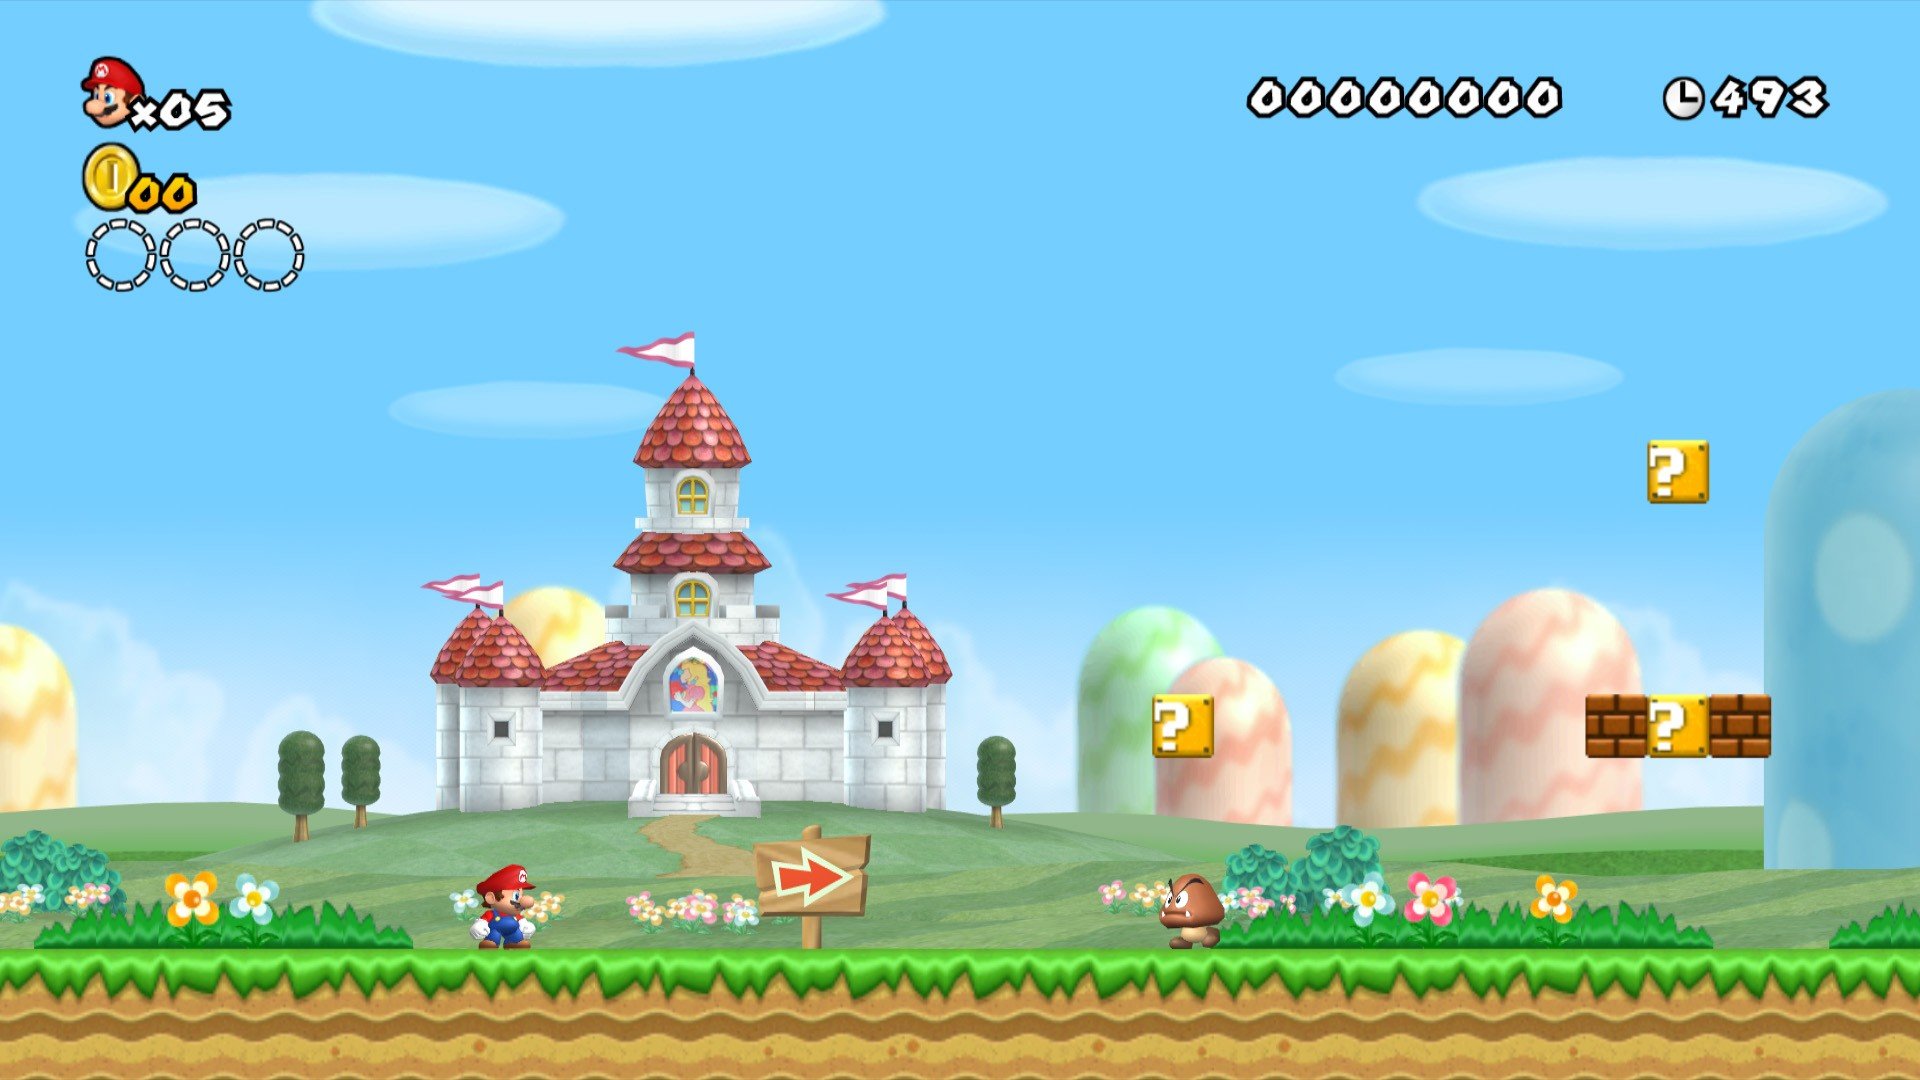 Download full hd 1920x1080 New Super Mario Bros. Wii desktop background ID:113191 for free